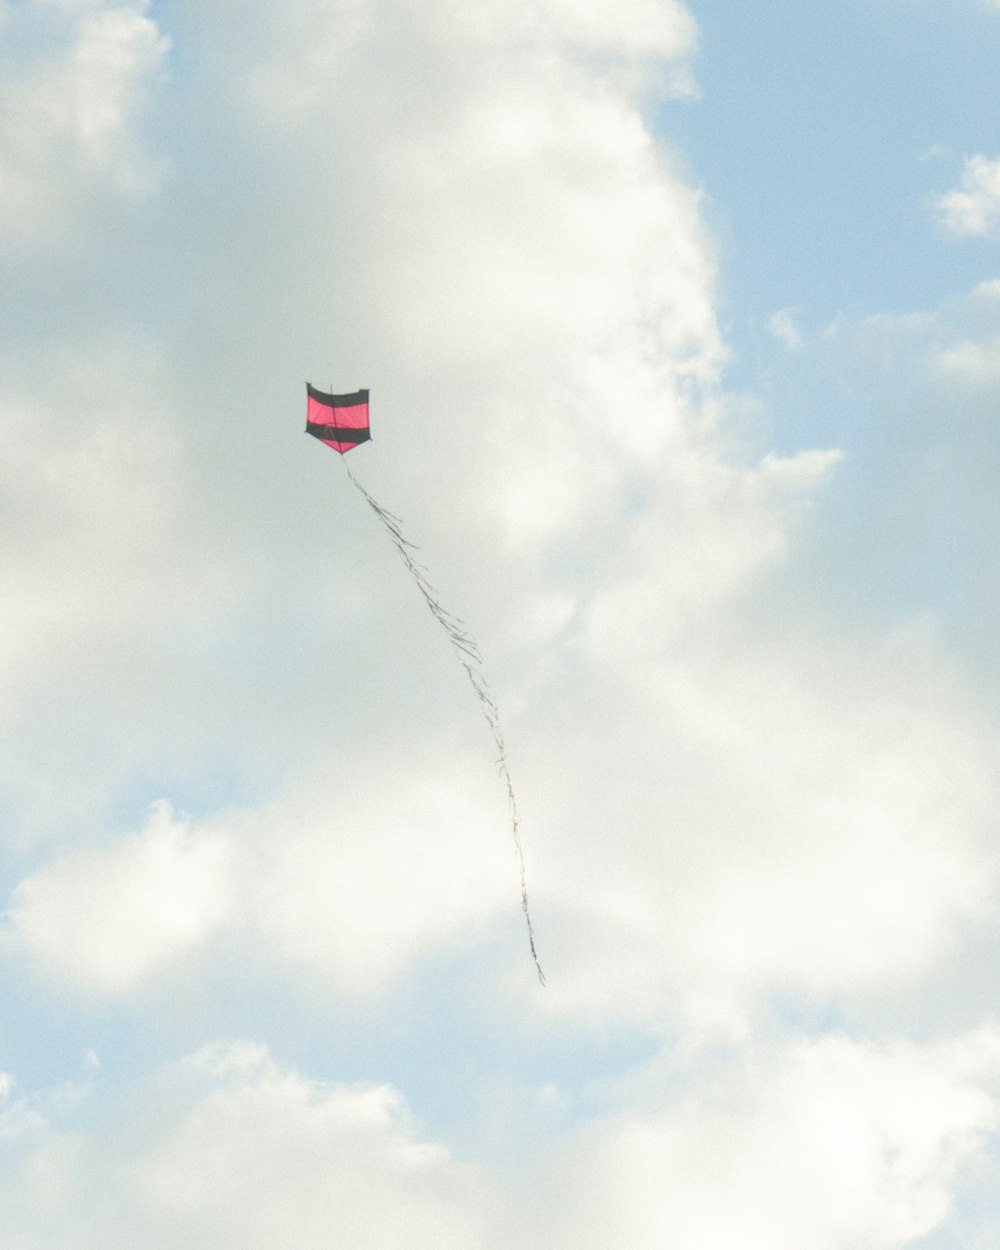 a kite is flying high in the sky